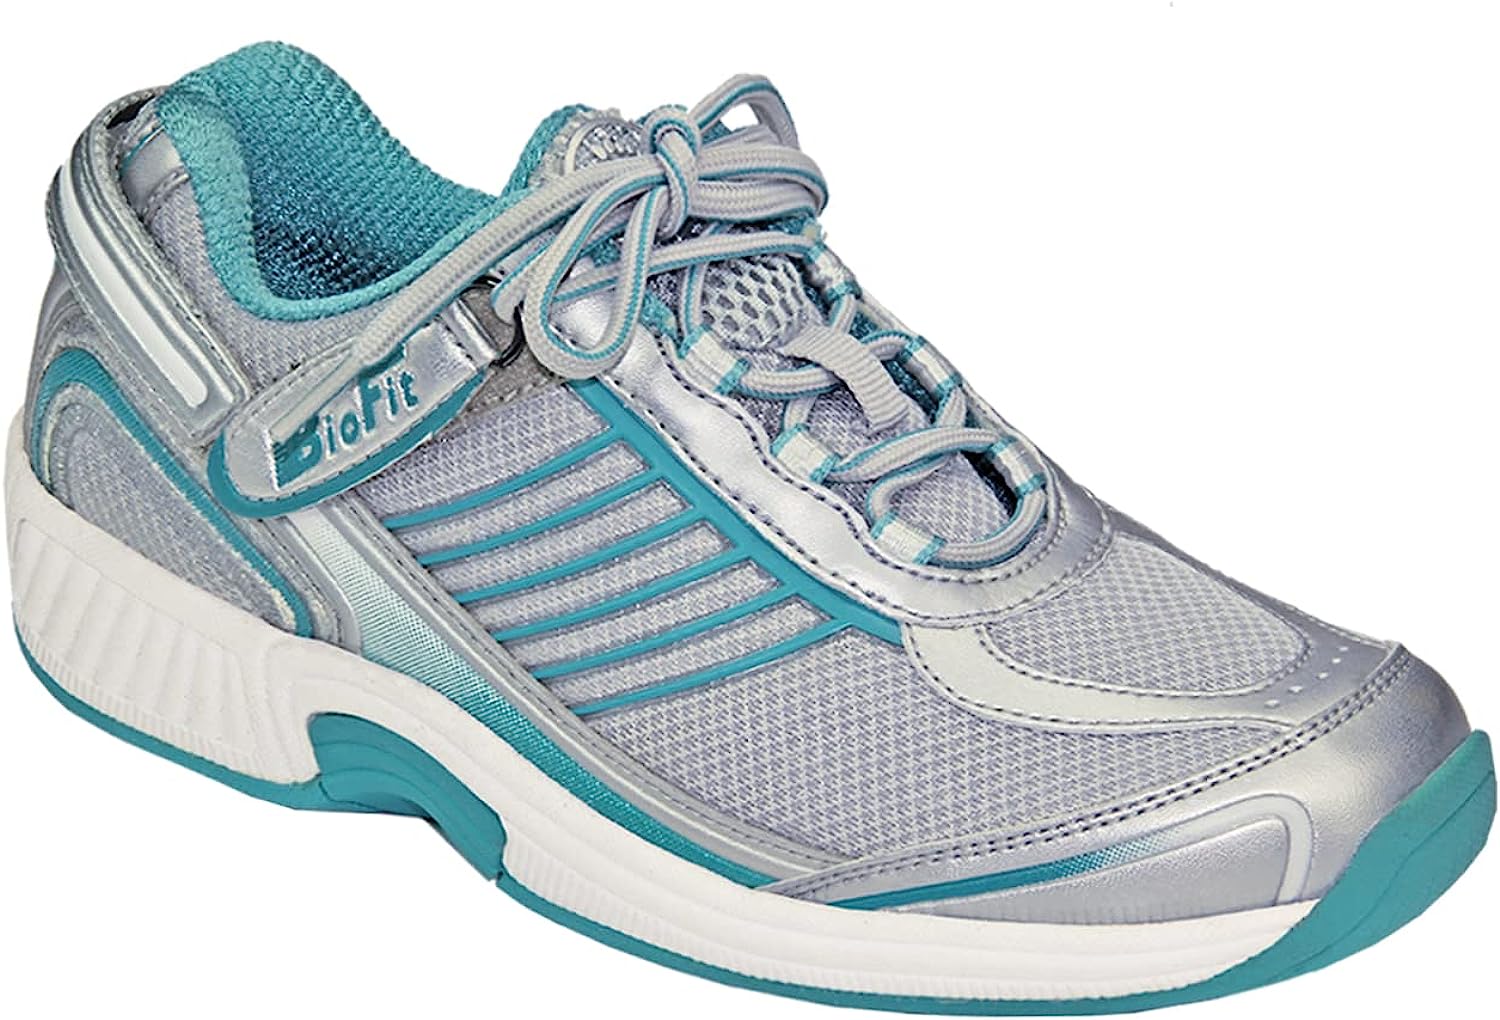 orthopedic shoes for back pain product comparison